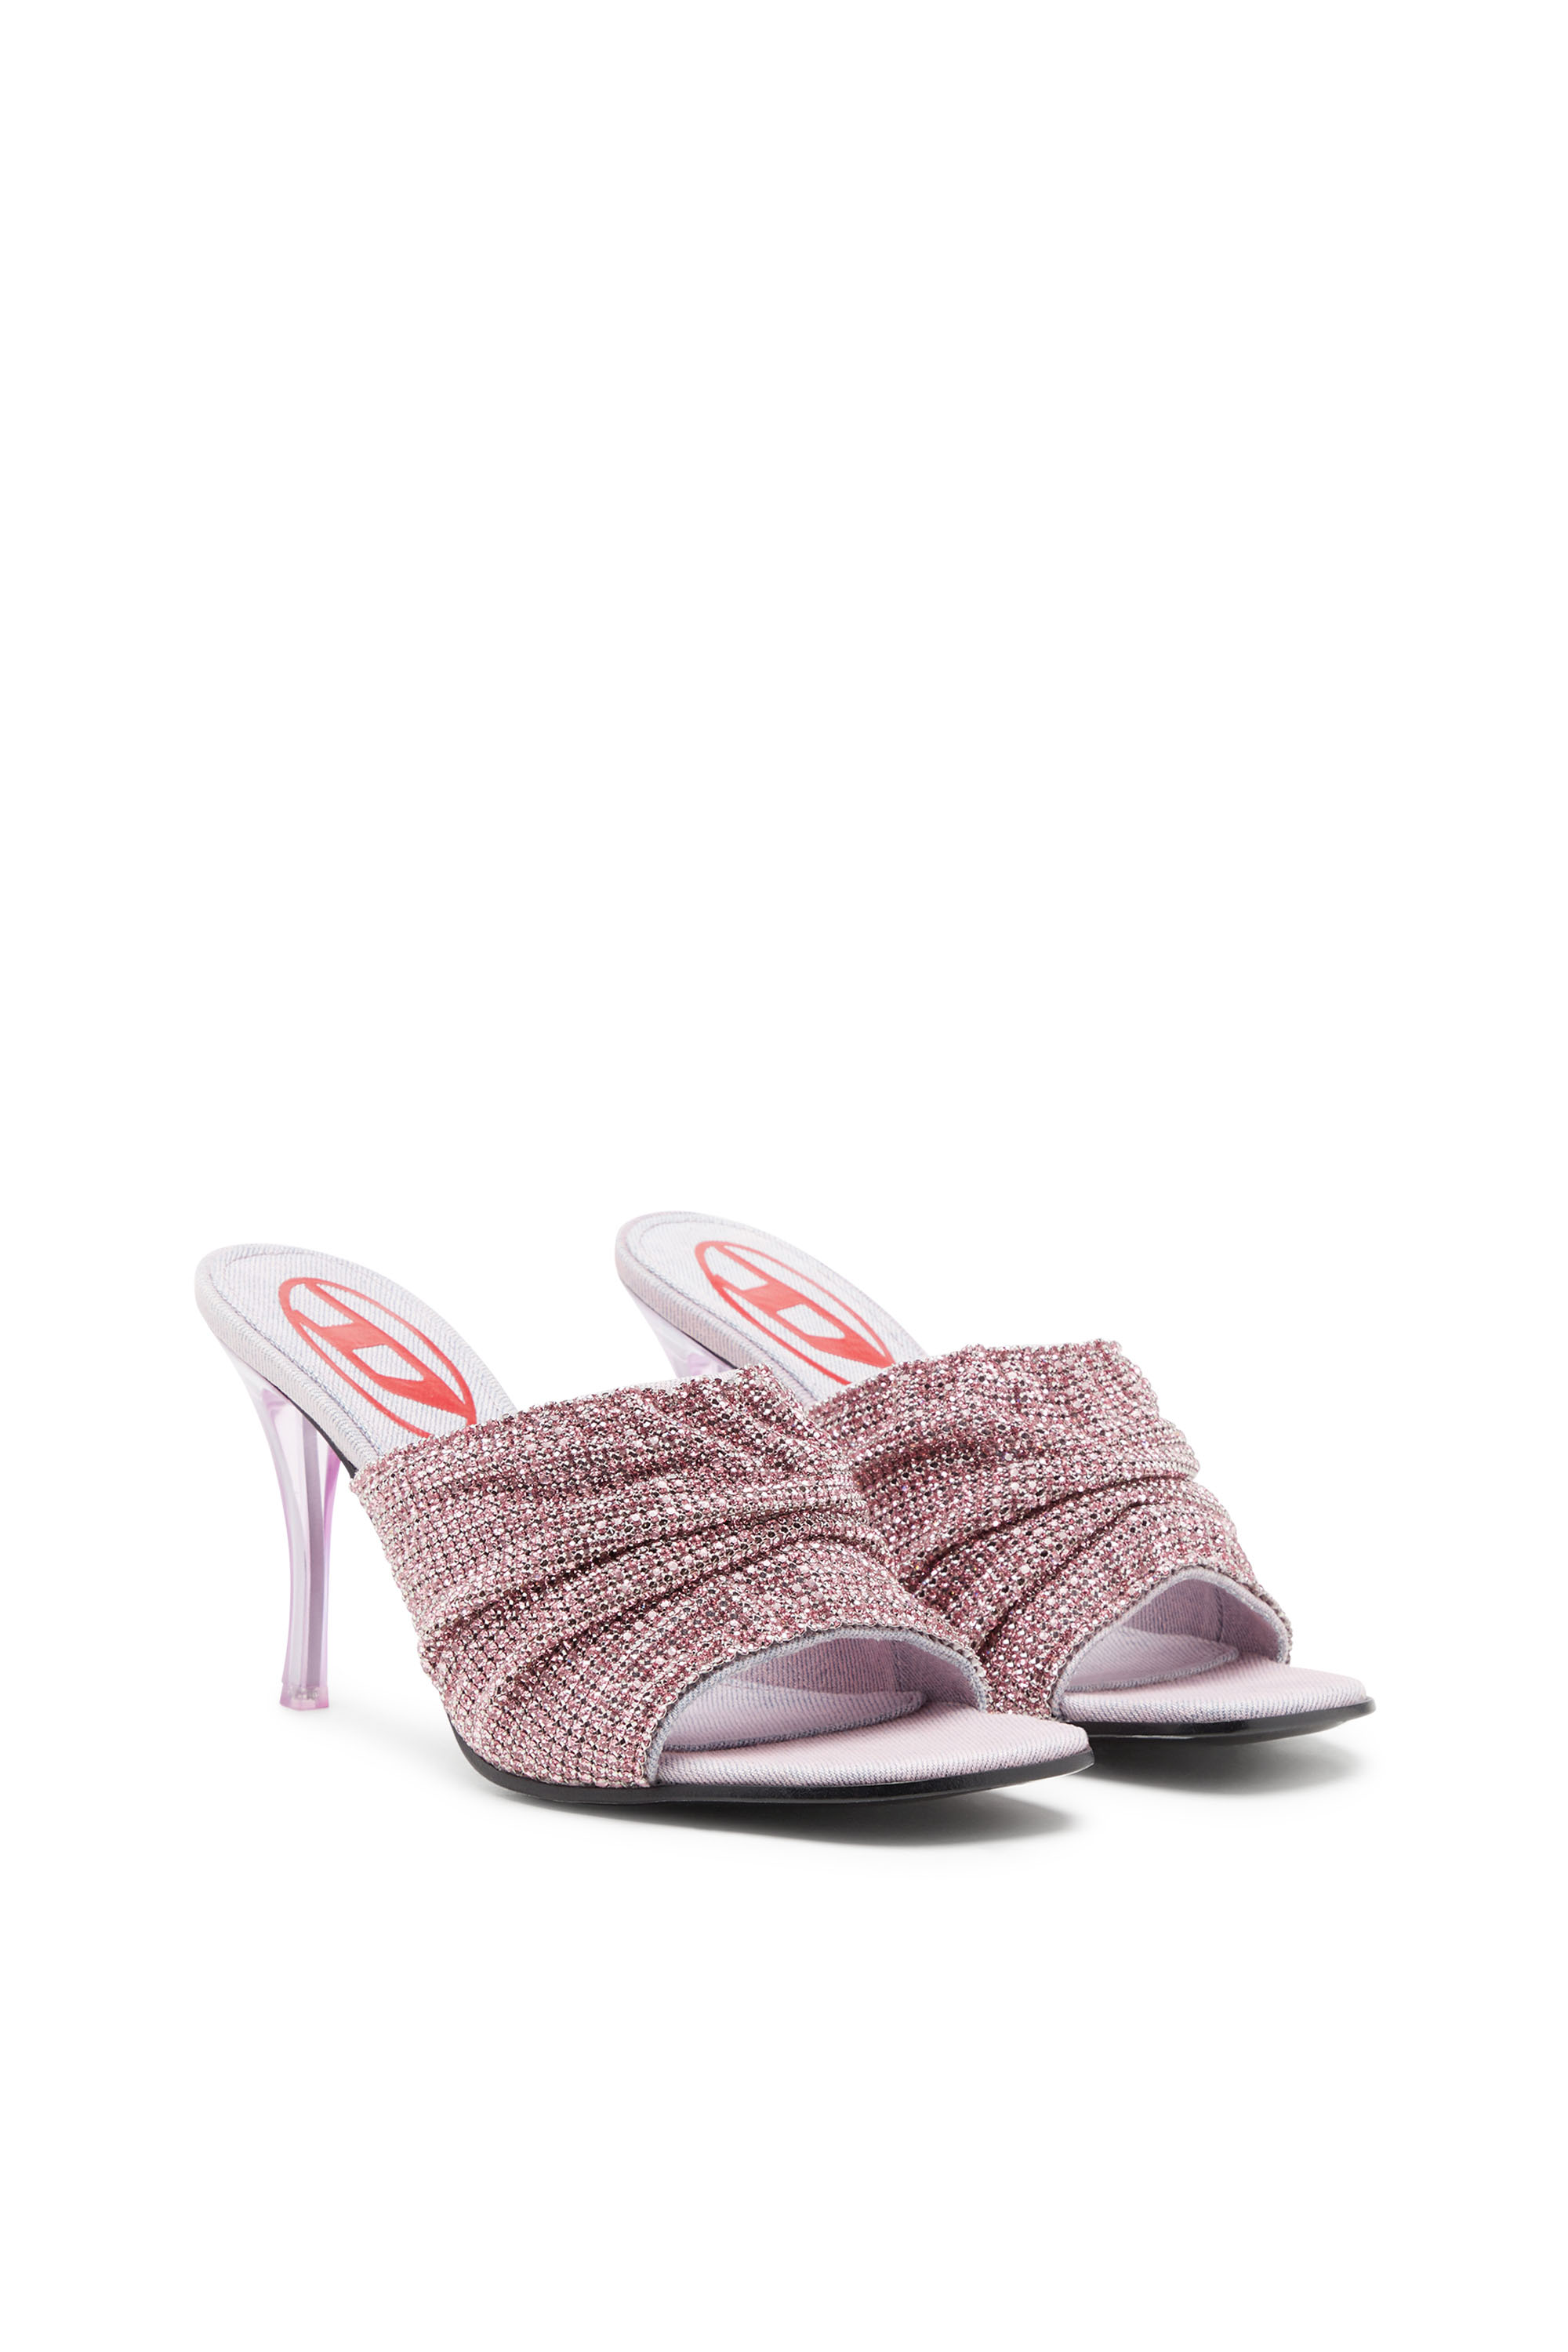 Diesel - D-SYDNEY SDL S, Female D-Sydney Sdl S Sandals - Mule sandals with rhinestone band in Pink - Image 2